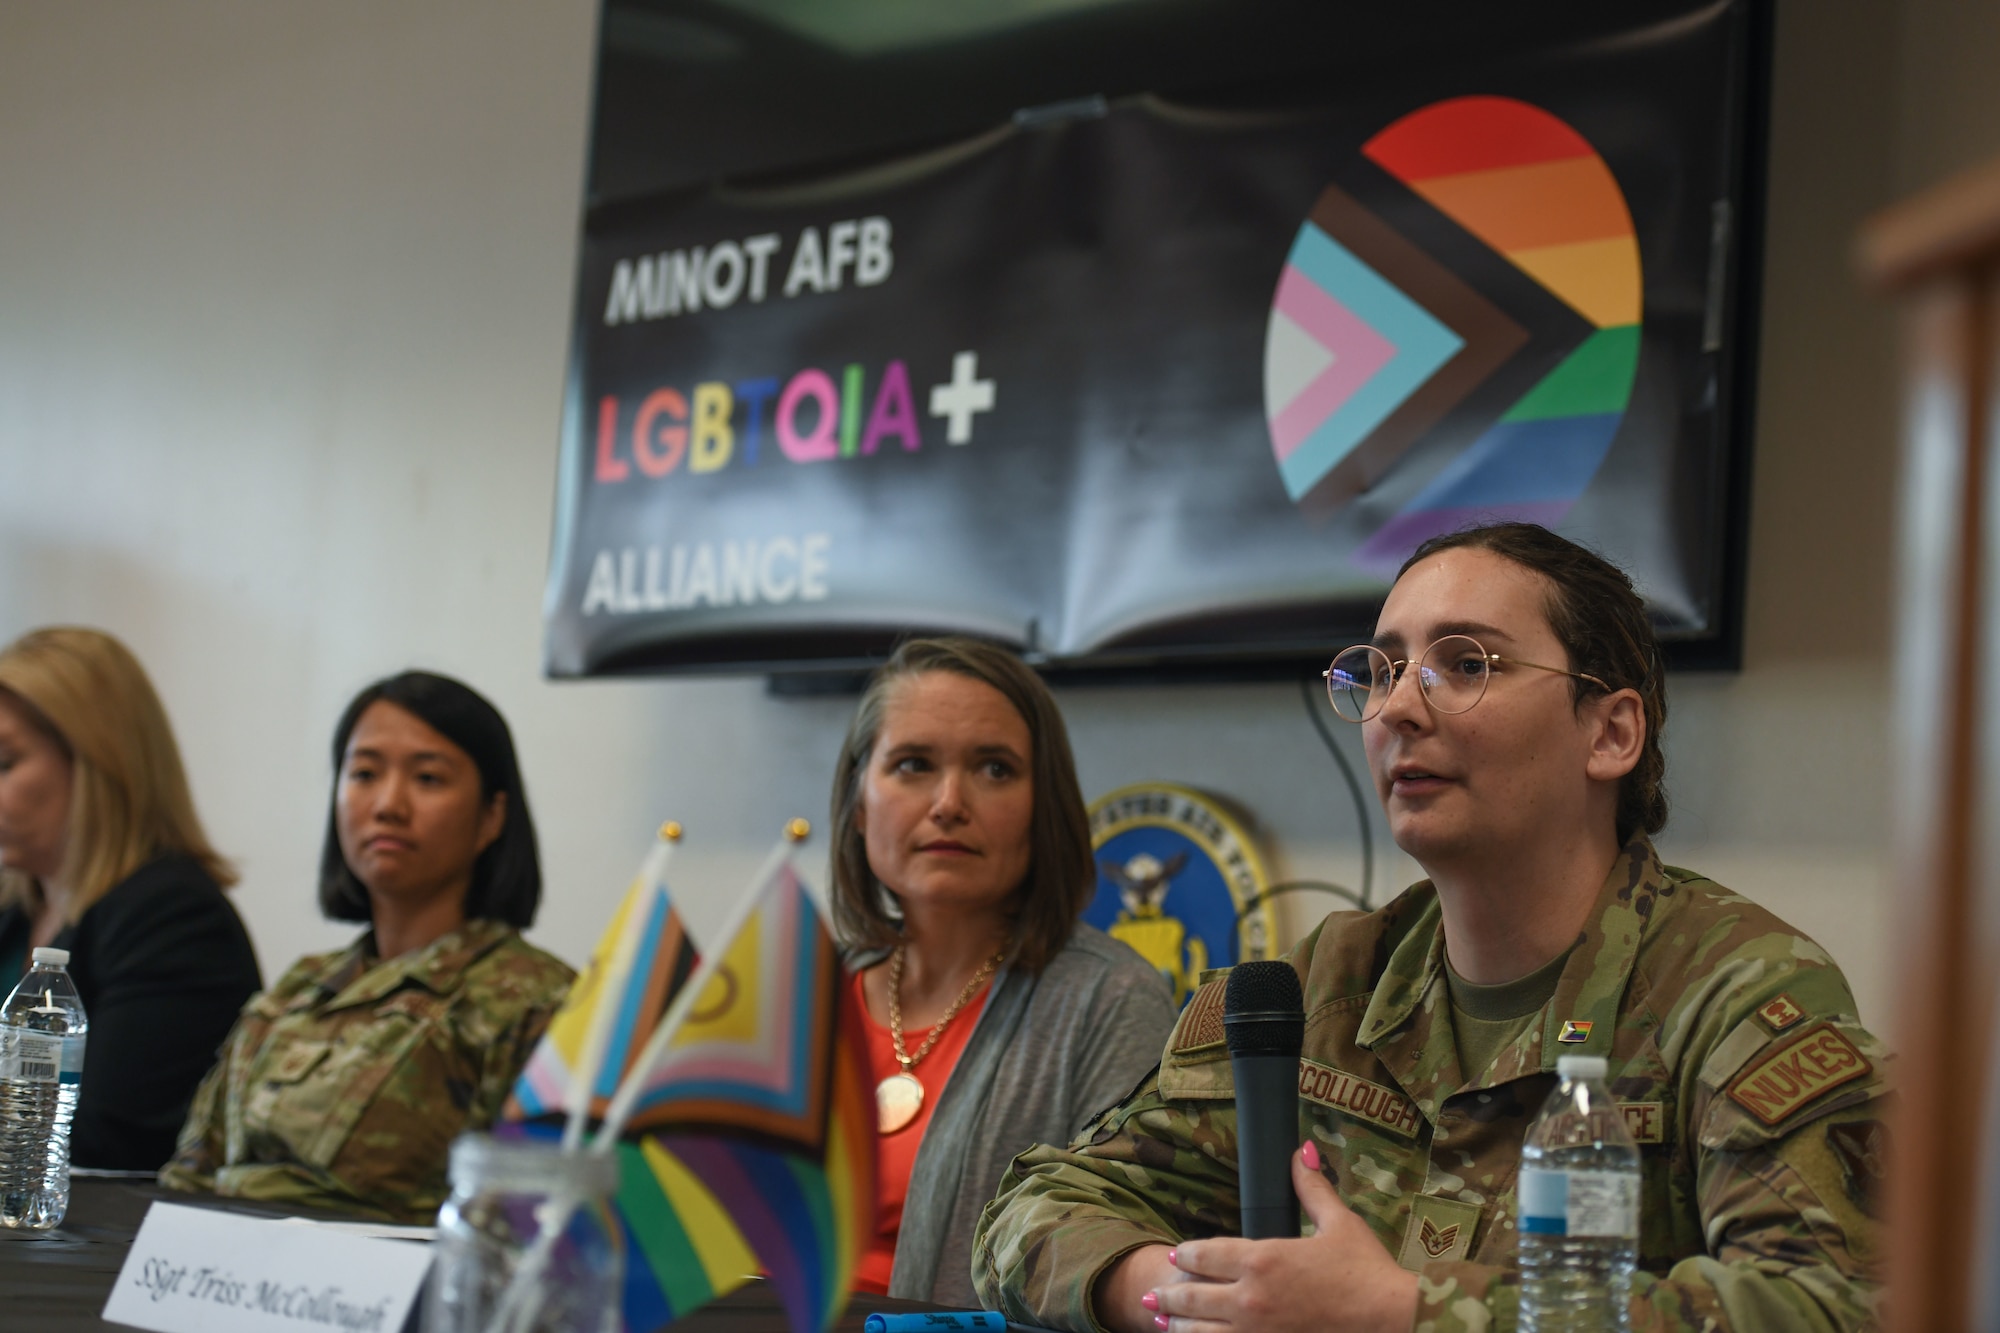 Team Minot Airmen participate in a 2023 Pride Month panel at Minot Air Force Base, North Dakota, June 14, 2023. Members of Team Minot speak during a 2023 Pride Month Panel at Minot Air Force Base, North Dakota, June 14, 2023. During the event members of the panel shared their experiences and the impact of the LGBTQI+ community. (U.S. Air Force Photo by Airman 1st Class Trust Tate)